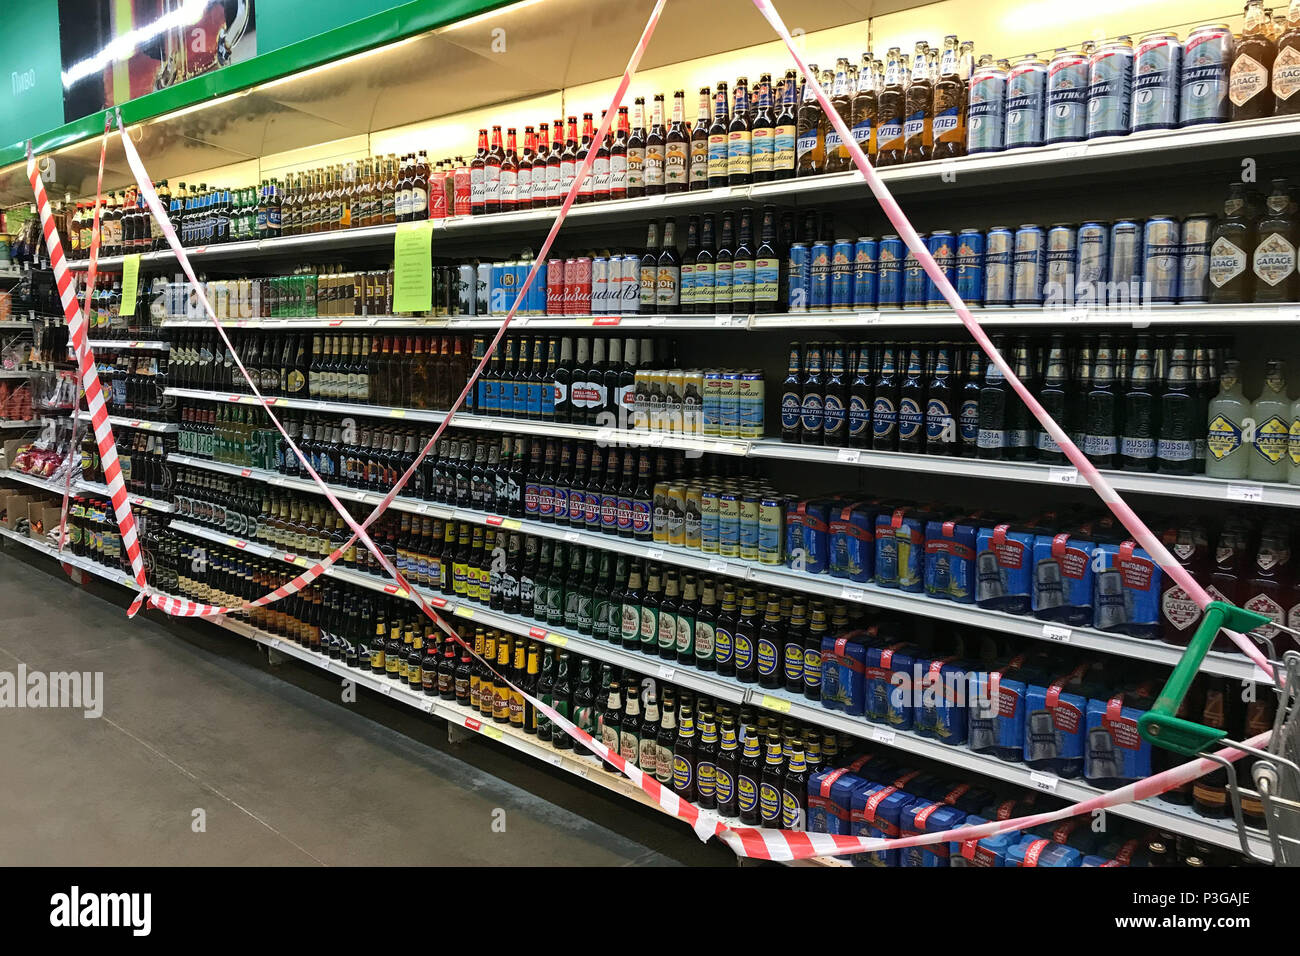 Red tape across the drink section of a local supermarket in central Volgograd as alcoholic drinks are no longer available to buy ahead of England's first match of the 2018 World Cup in Russia. Stock Photo